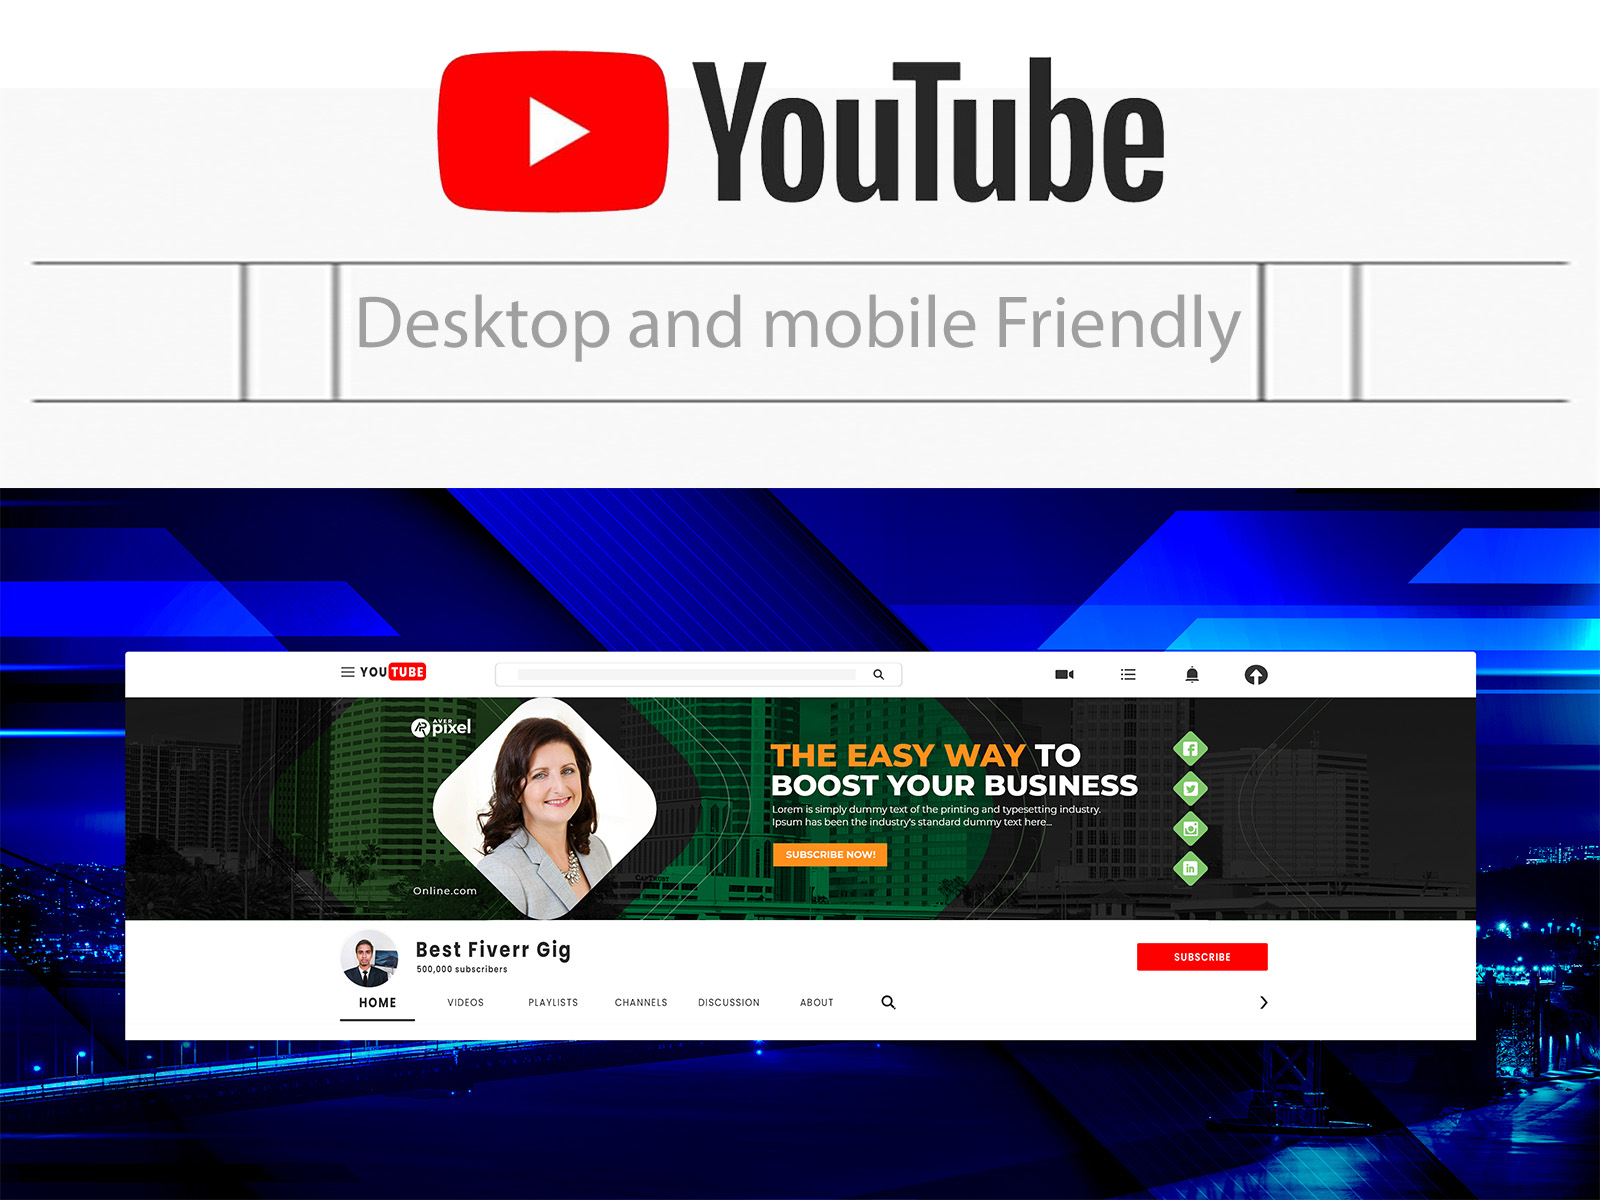 youtube channel banner template design free dawnload by Free mockup